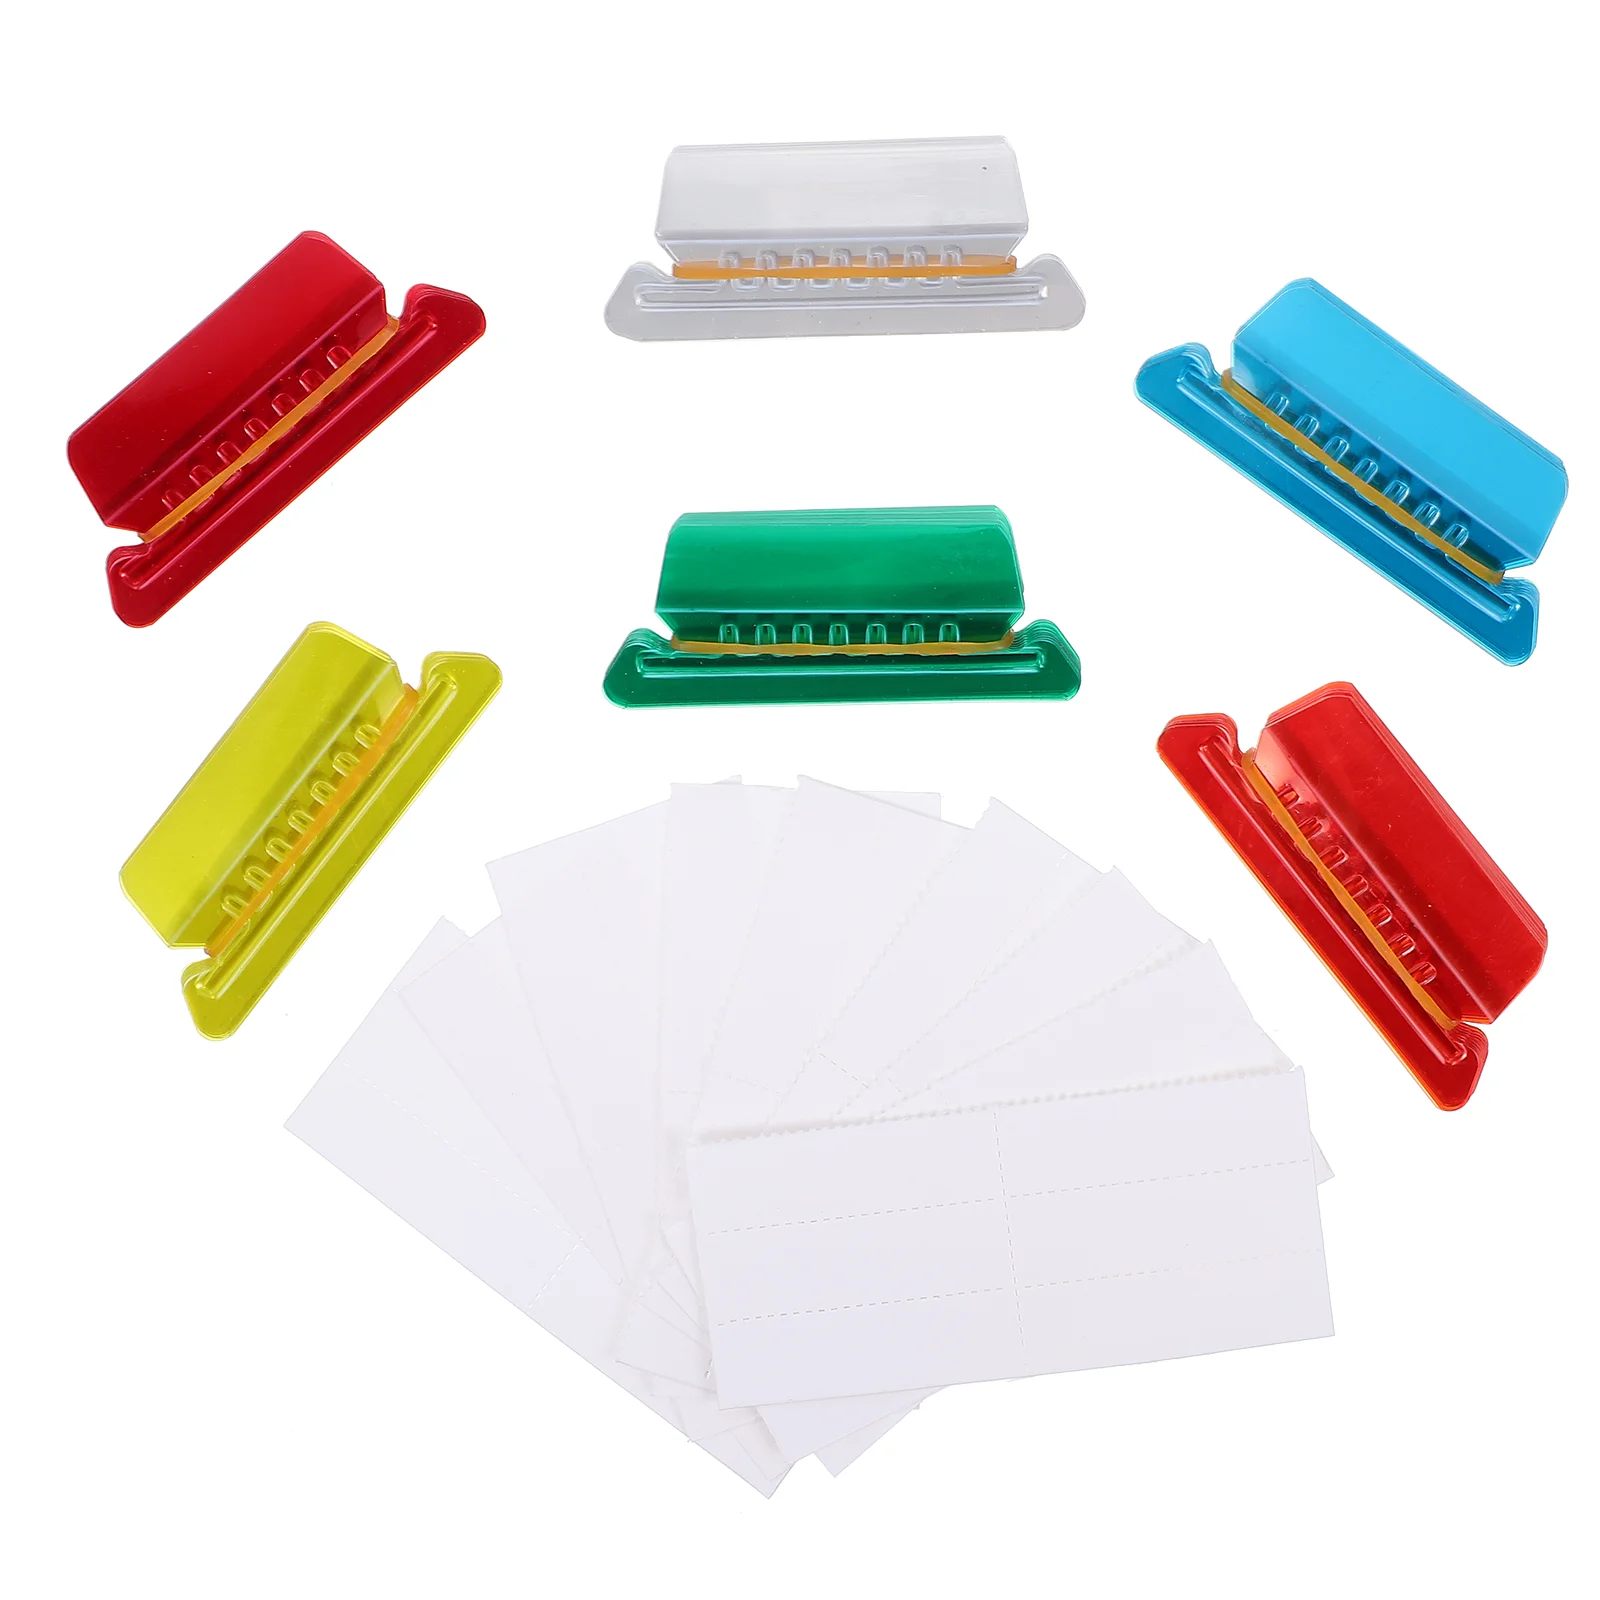 

File Tags Hanging Labels Folder Folders Tabs Pvc Filing Sorting Colored Supplies School Mix Size Letter Fittings Classification